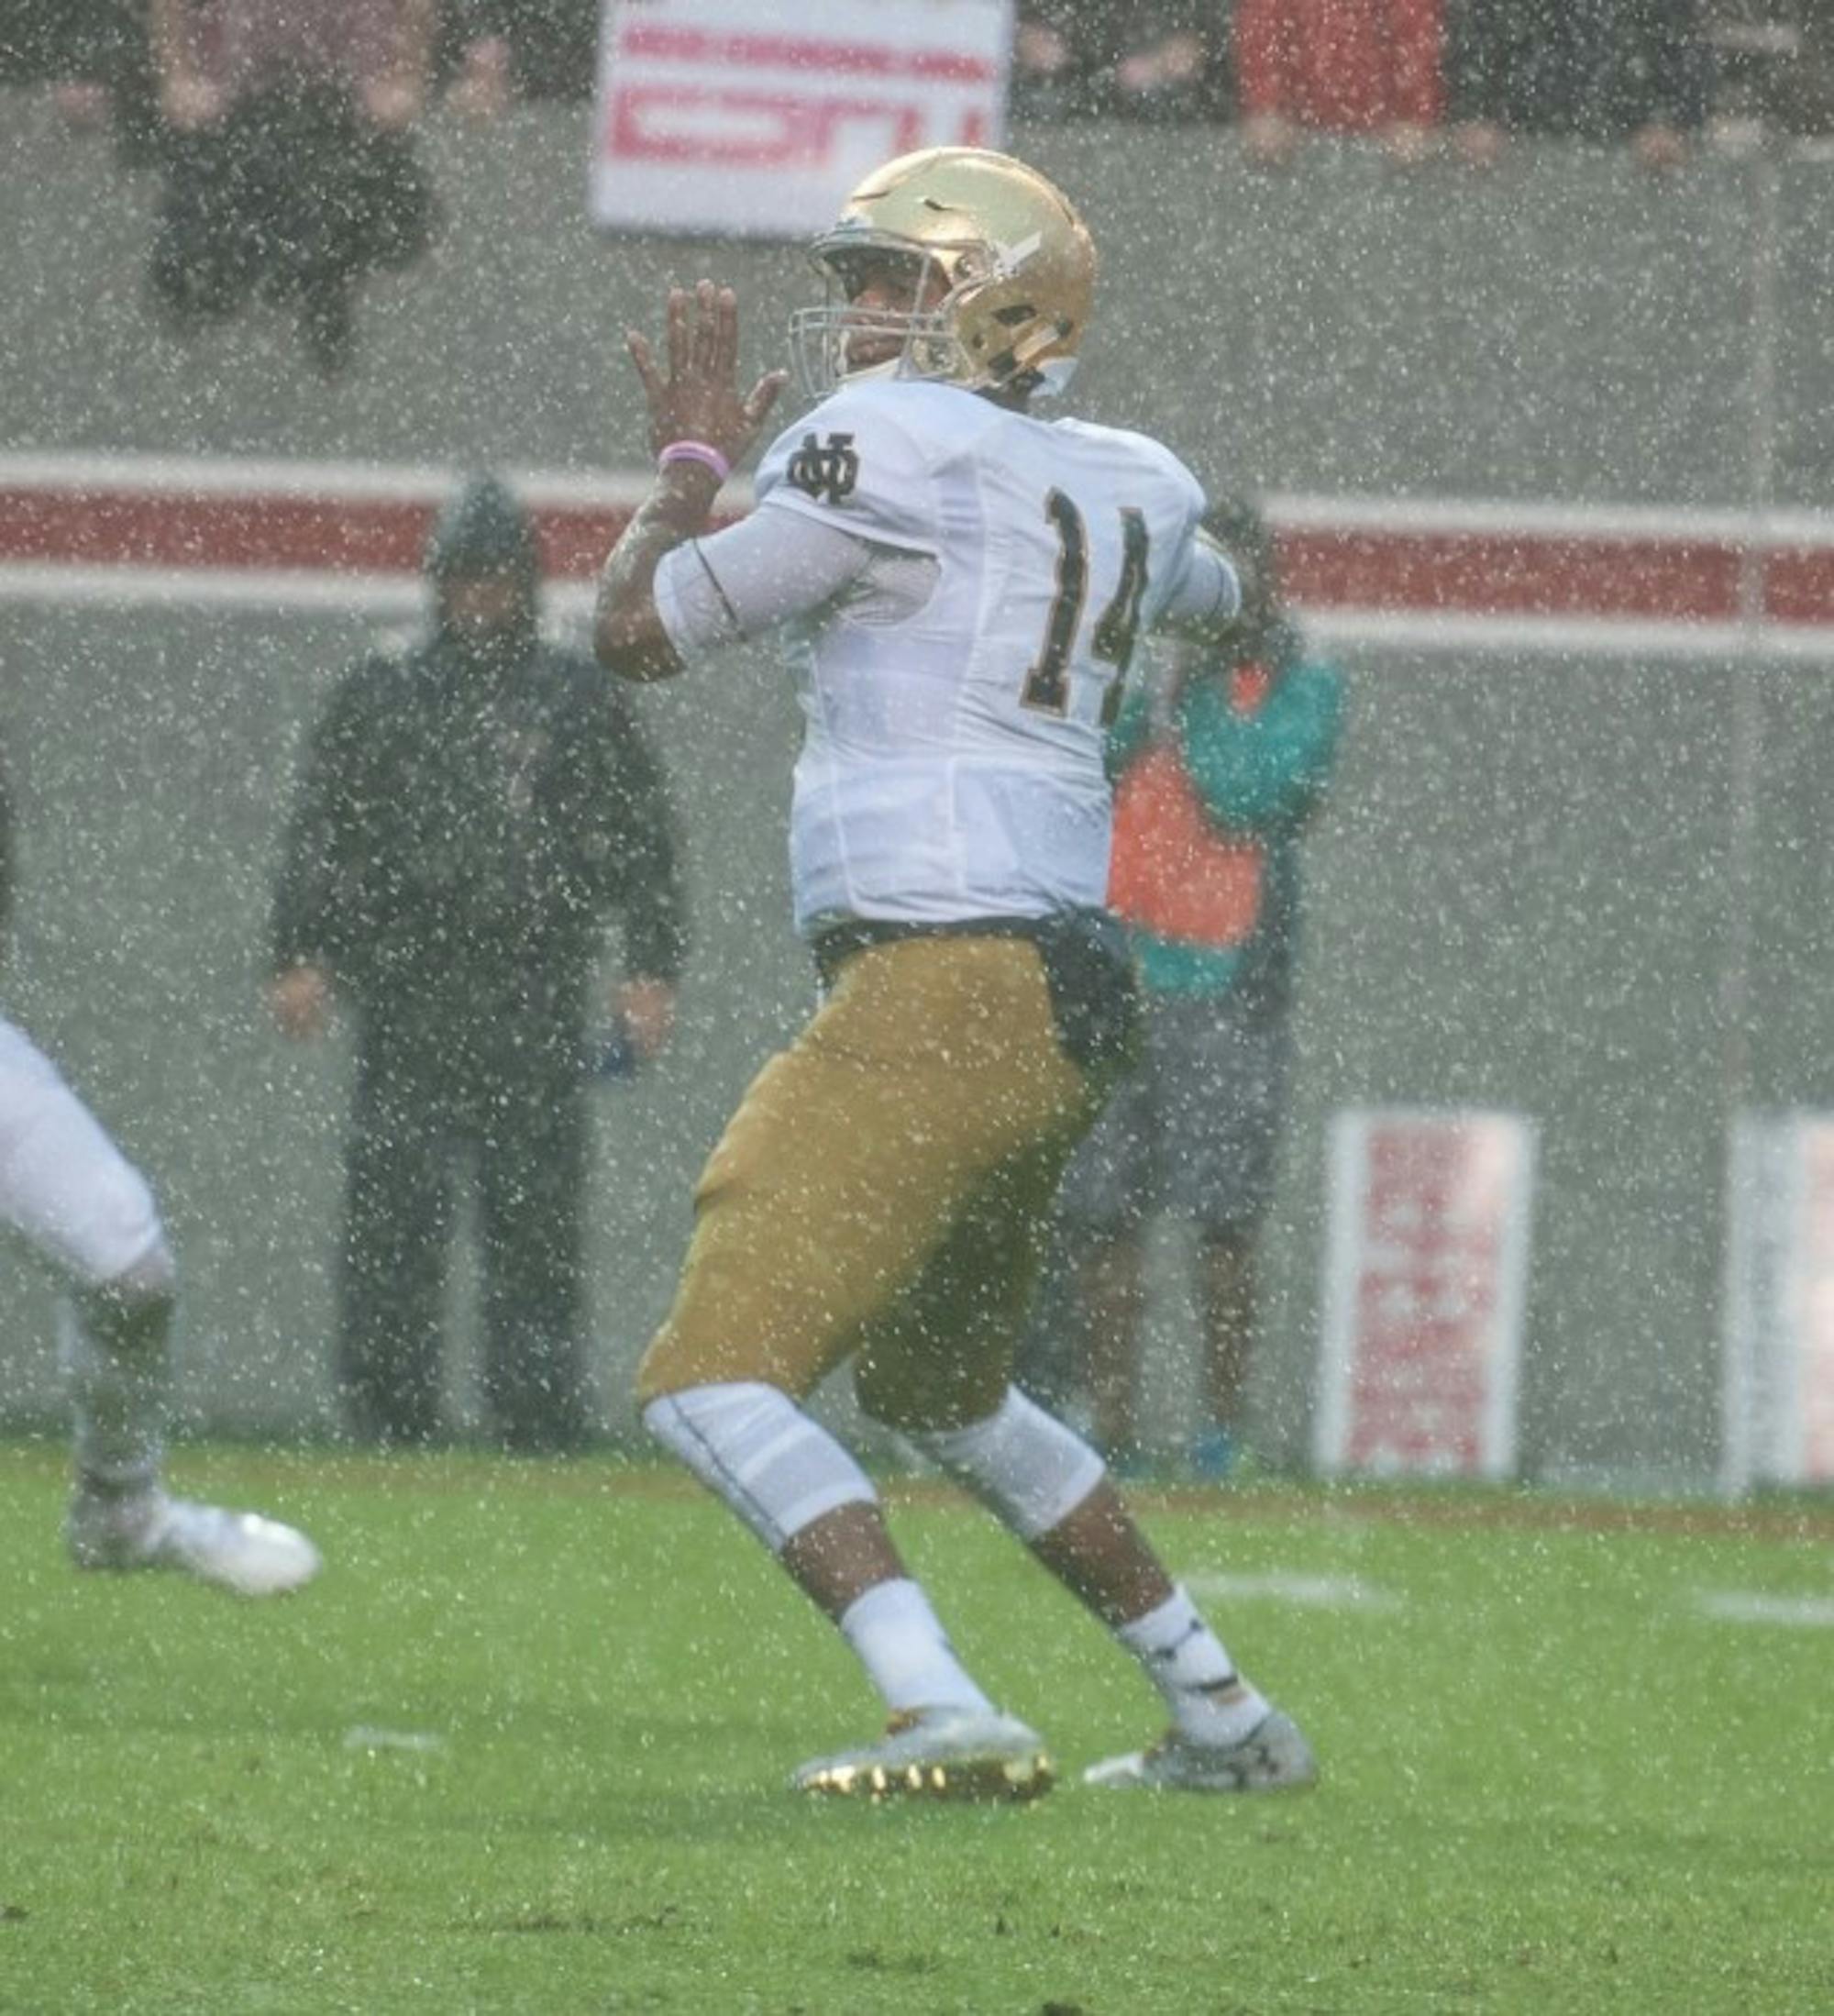 Irish junior quarterback DeShone Kizer winds up to throw a pass in Notre Dame's 10-3 loss to Stanford on Saturday.